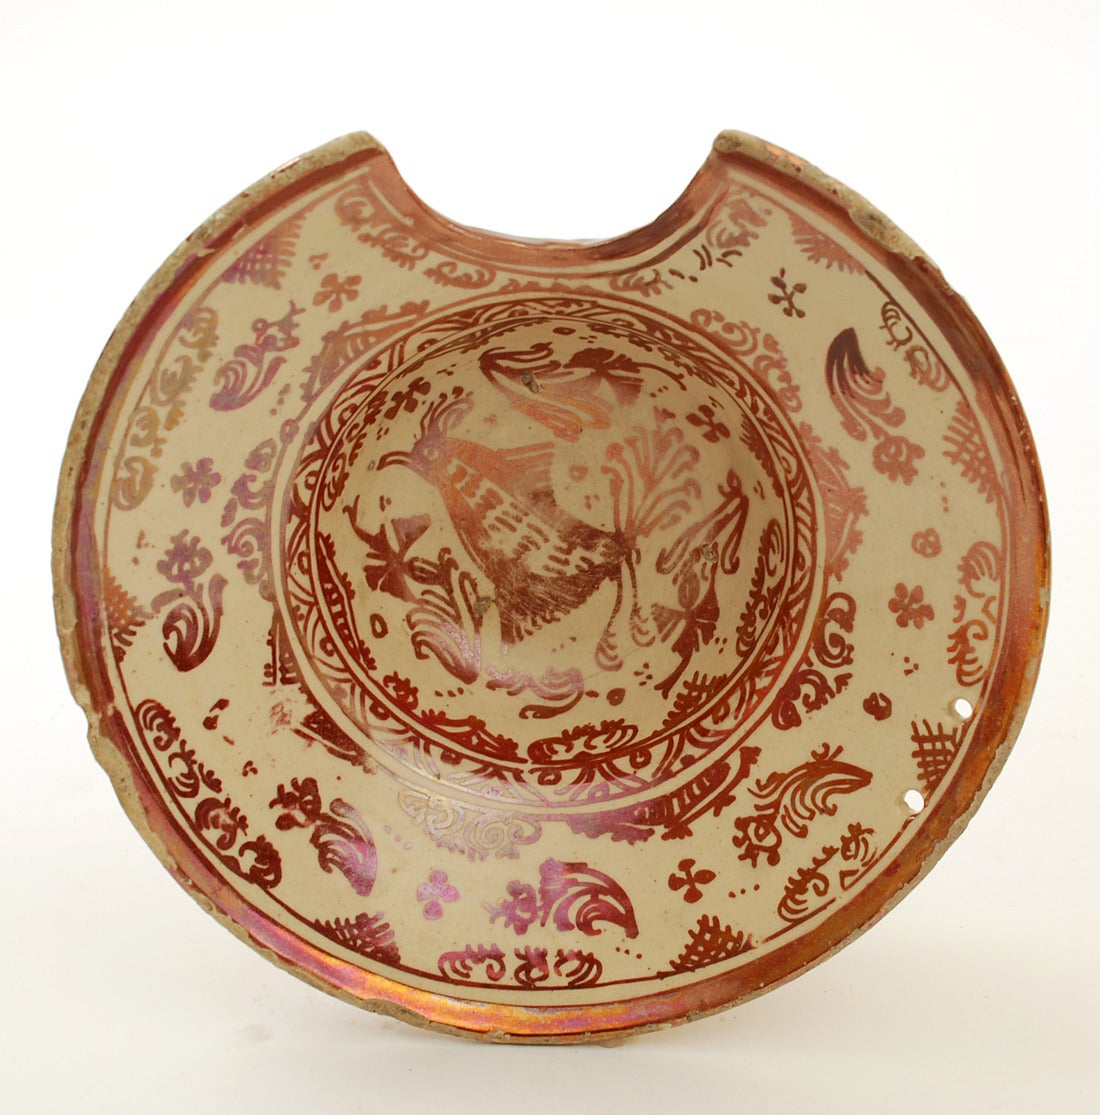 A very rare 18th century Hispano-Moresque lusterware bowl in deep copper over a milk white slip. Classic paralot bird motif surrounded by foliage and geometric patterns. This extremely rare form is a 'shaving' or barber's' bowl, with a deliberate